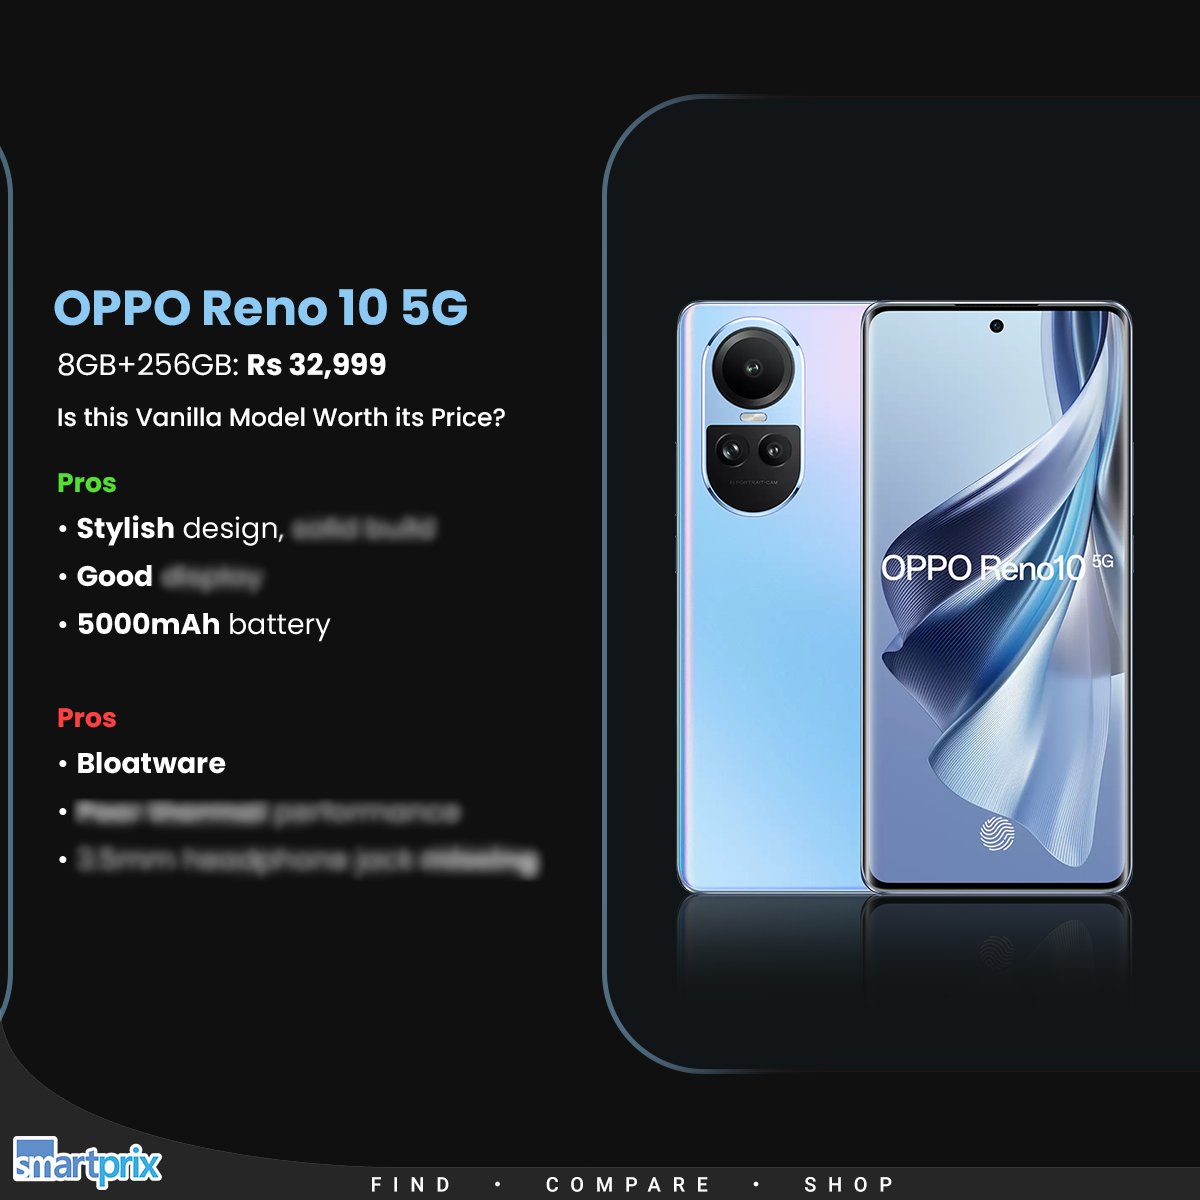 Smartprix on X: The Pros and Cons of Oppo Reno 10 5G